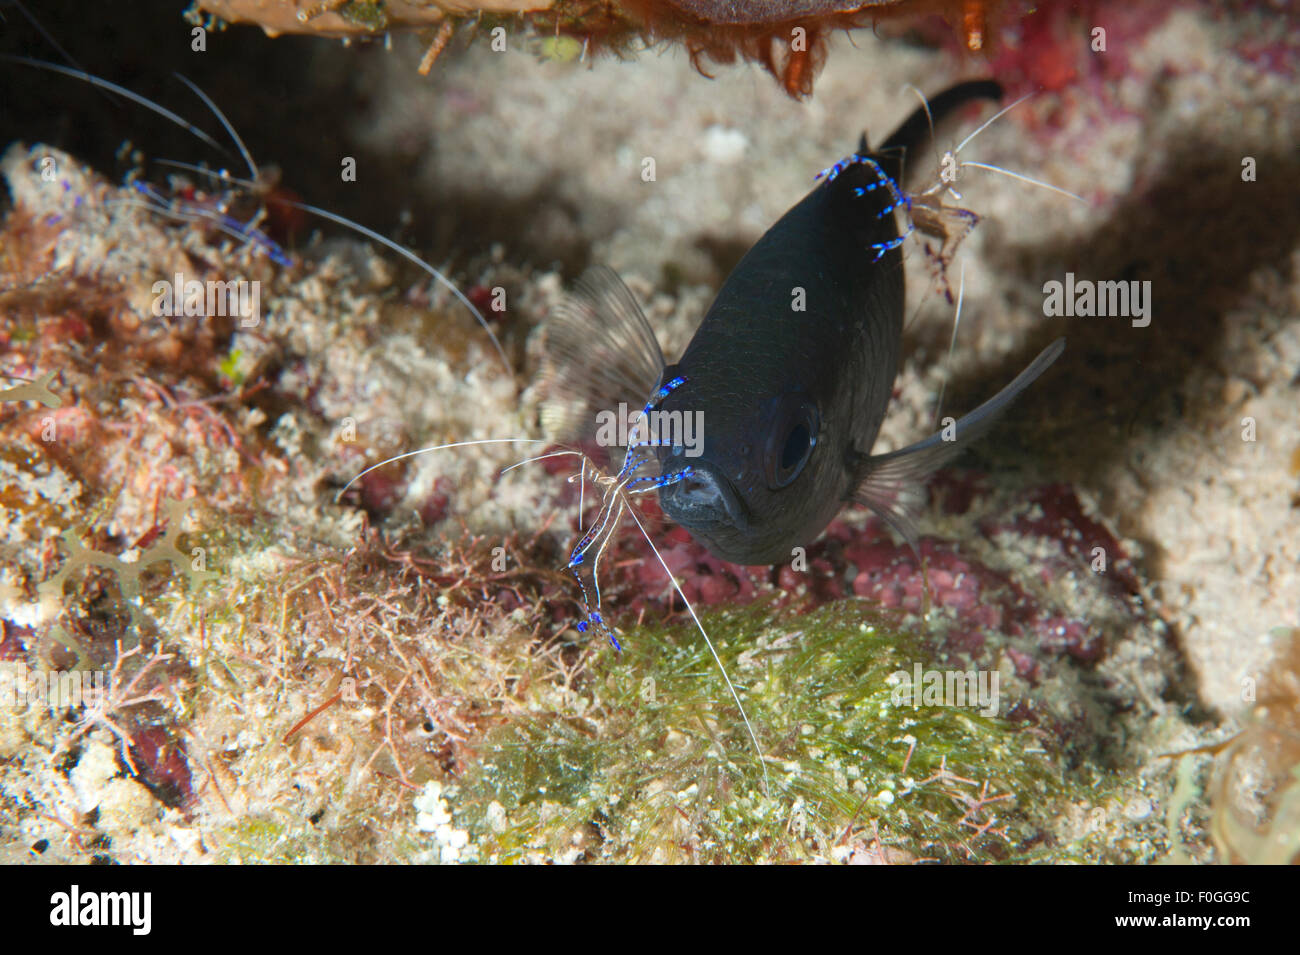 A Longfin Damselfish being cleaned by Pederson Cleaner Shrimp in Little Cayman. Stock Photo